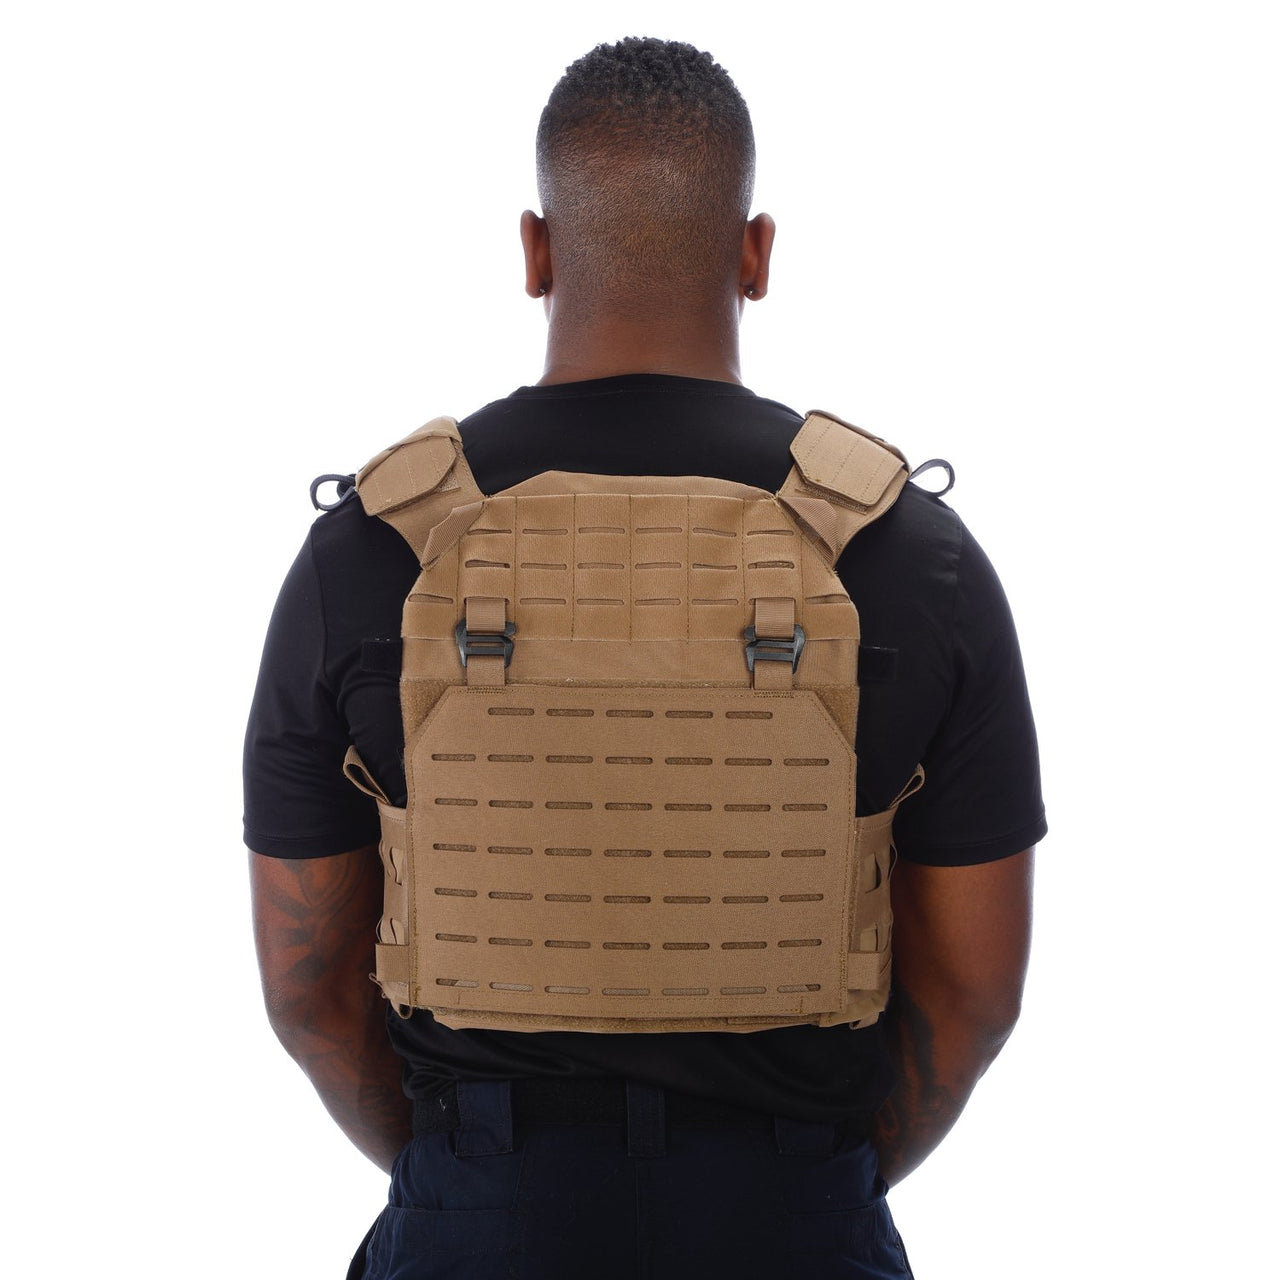 The back view of a man wearing a Body Armor Direct Expert Plate Carrier.